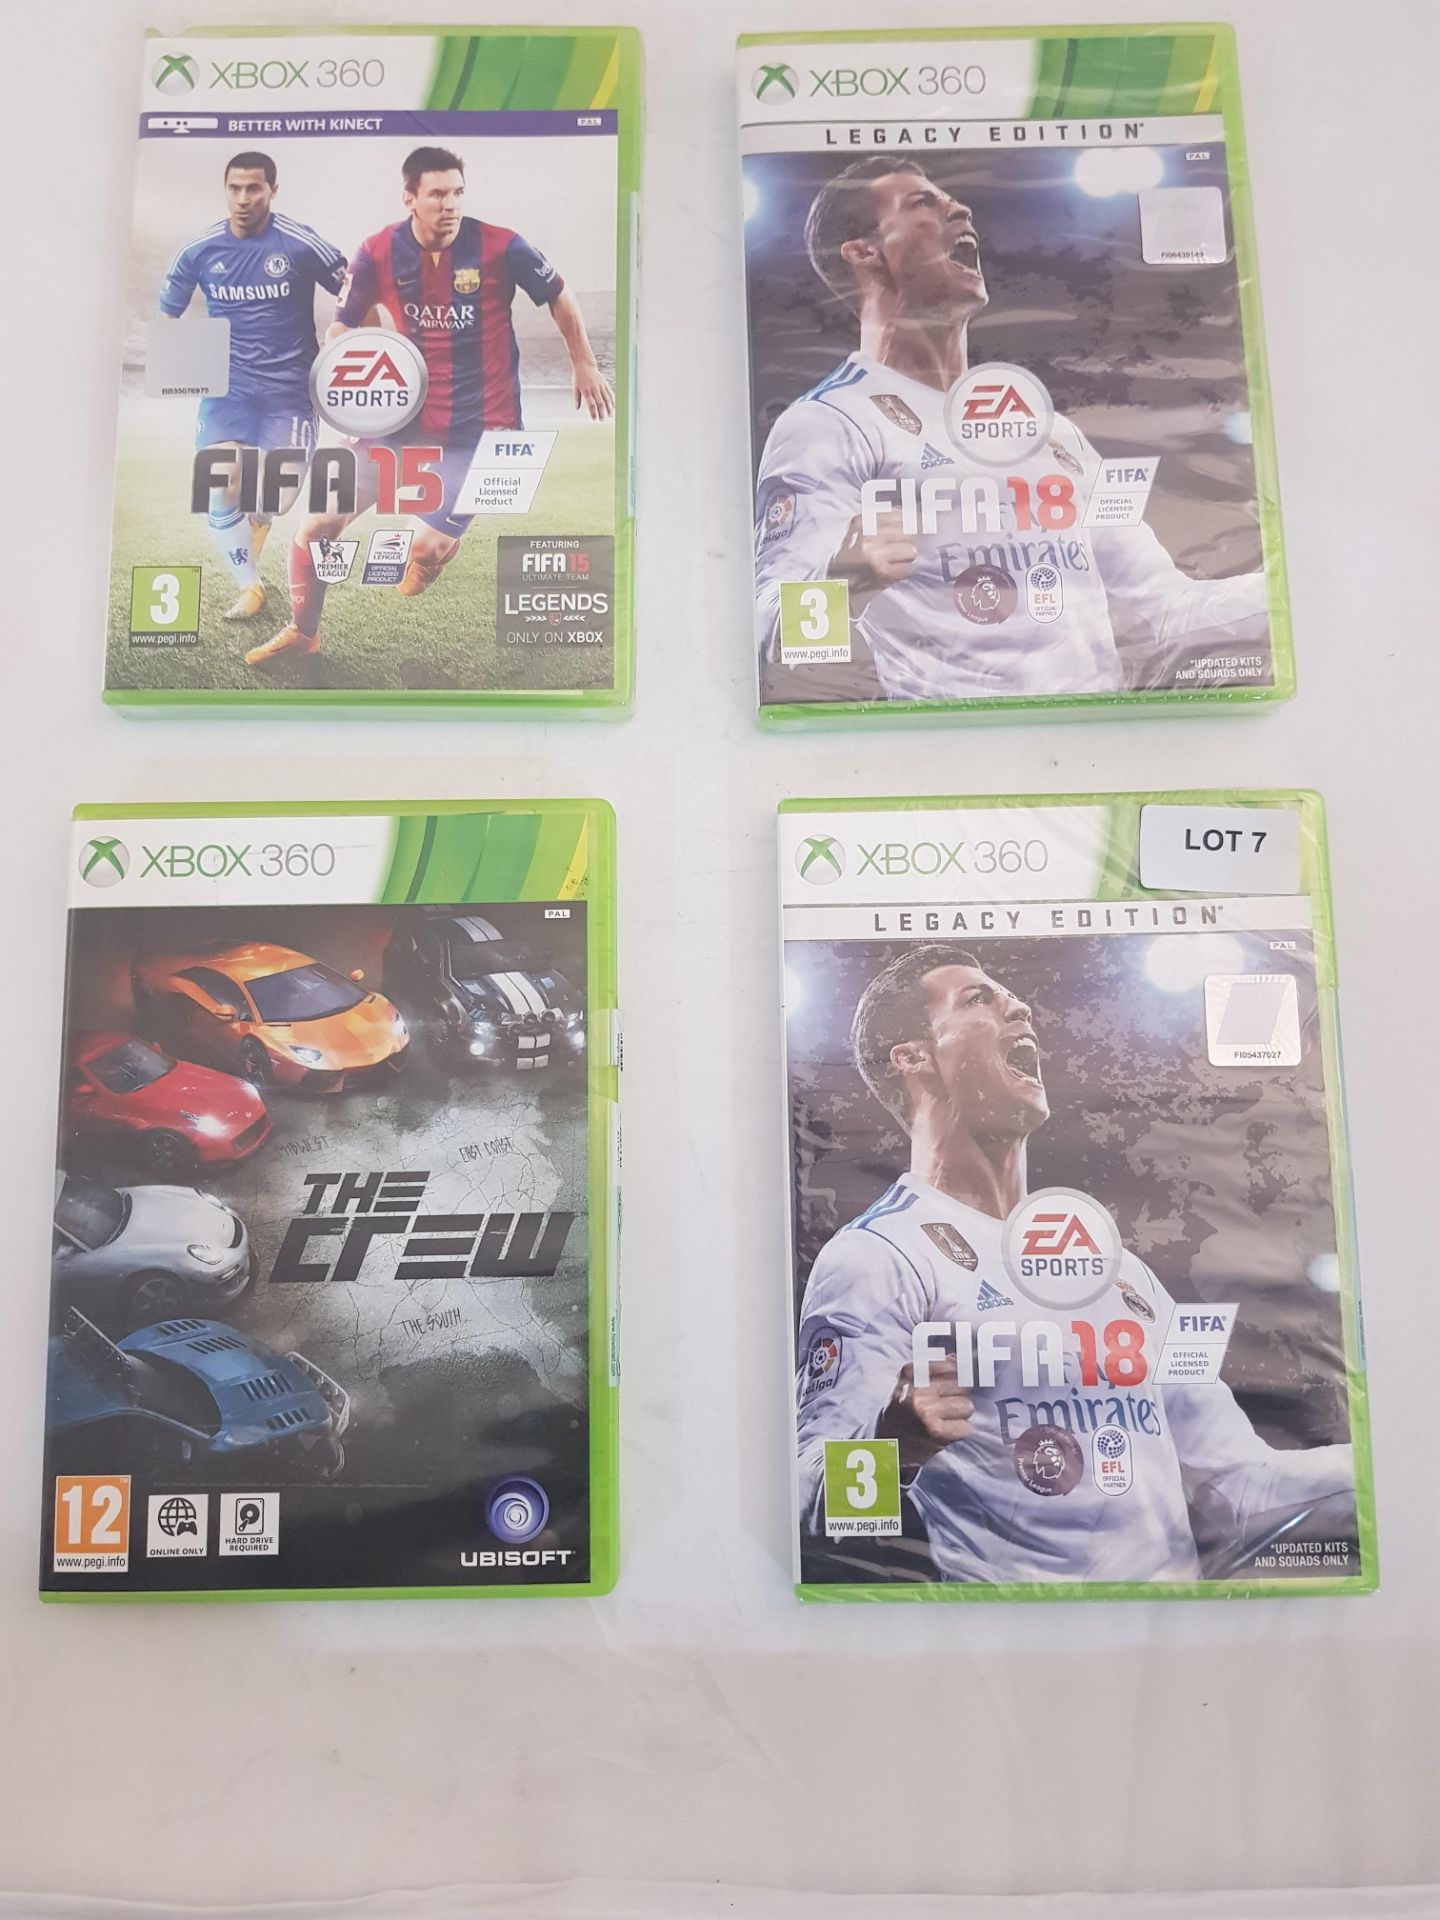 4 x Xbox 360 games to included 2 x FIFA 18, The crew and FIFA 15